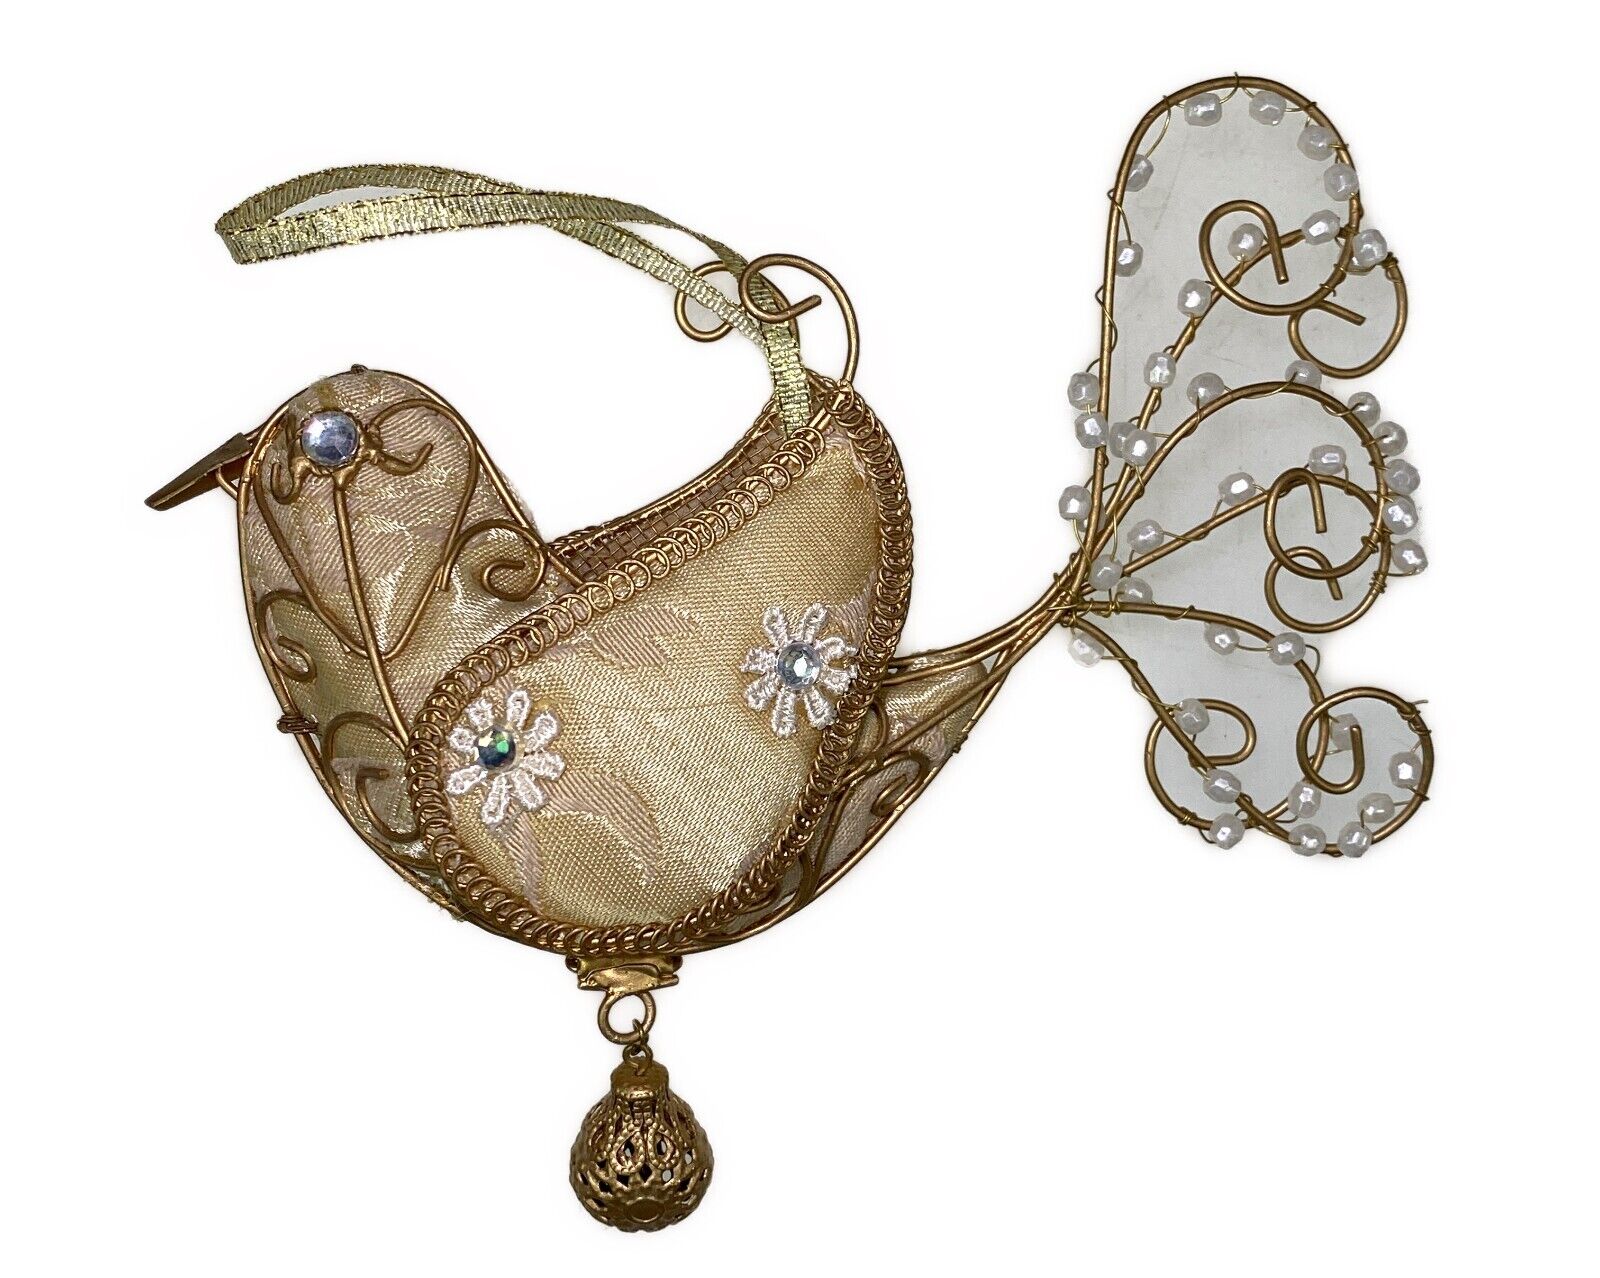 Bird Victorian Christmas Holiday Ornament Golden Wire & Cloth H5”xL6”